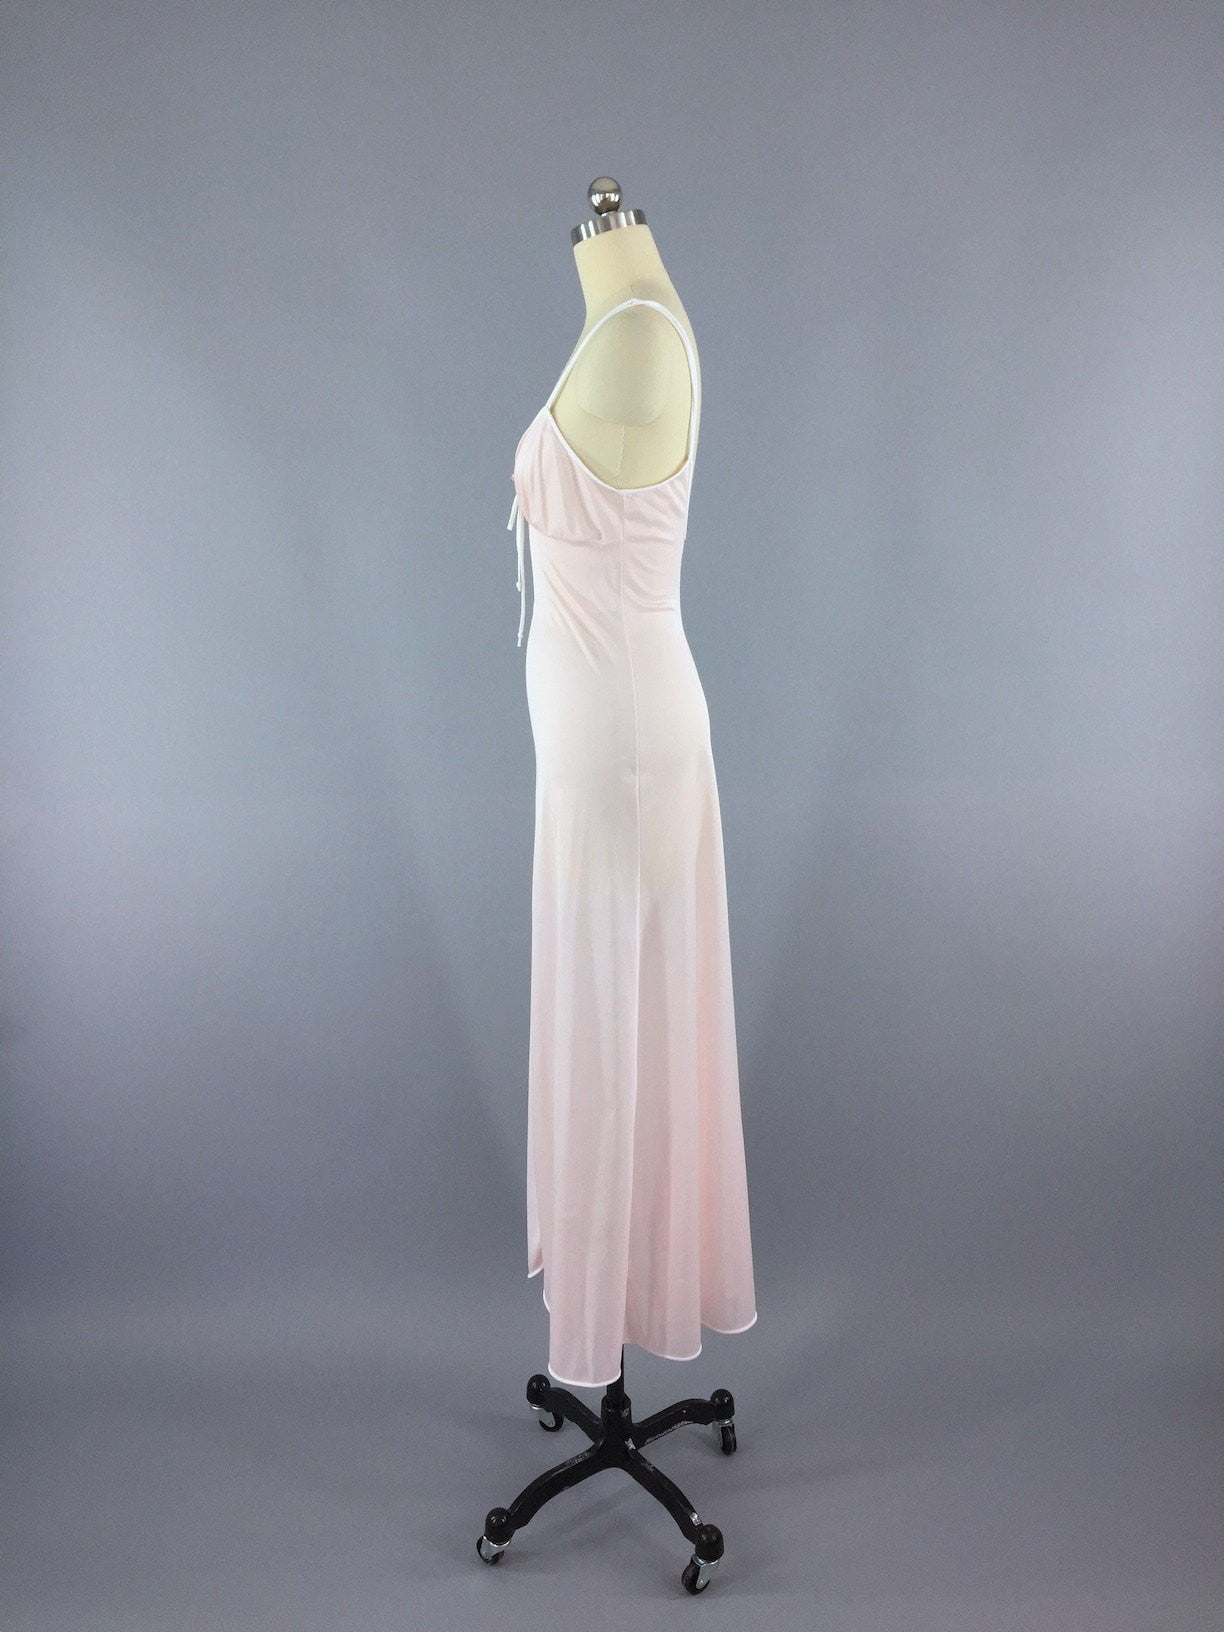 Vintage 1980s Nightgown / Pastel Pink - ThisBlueBird